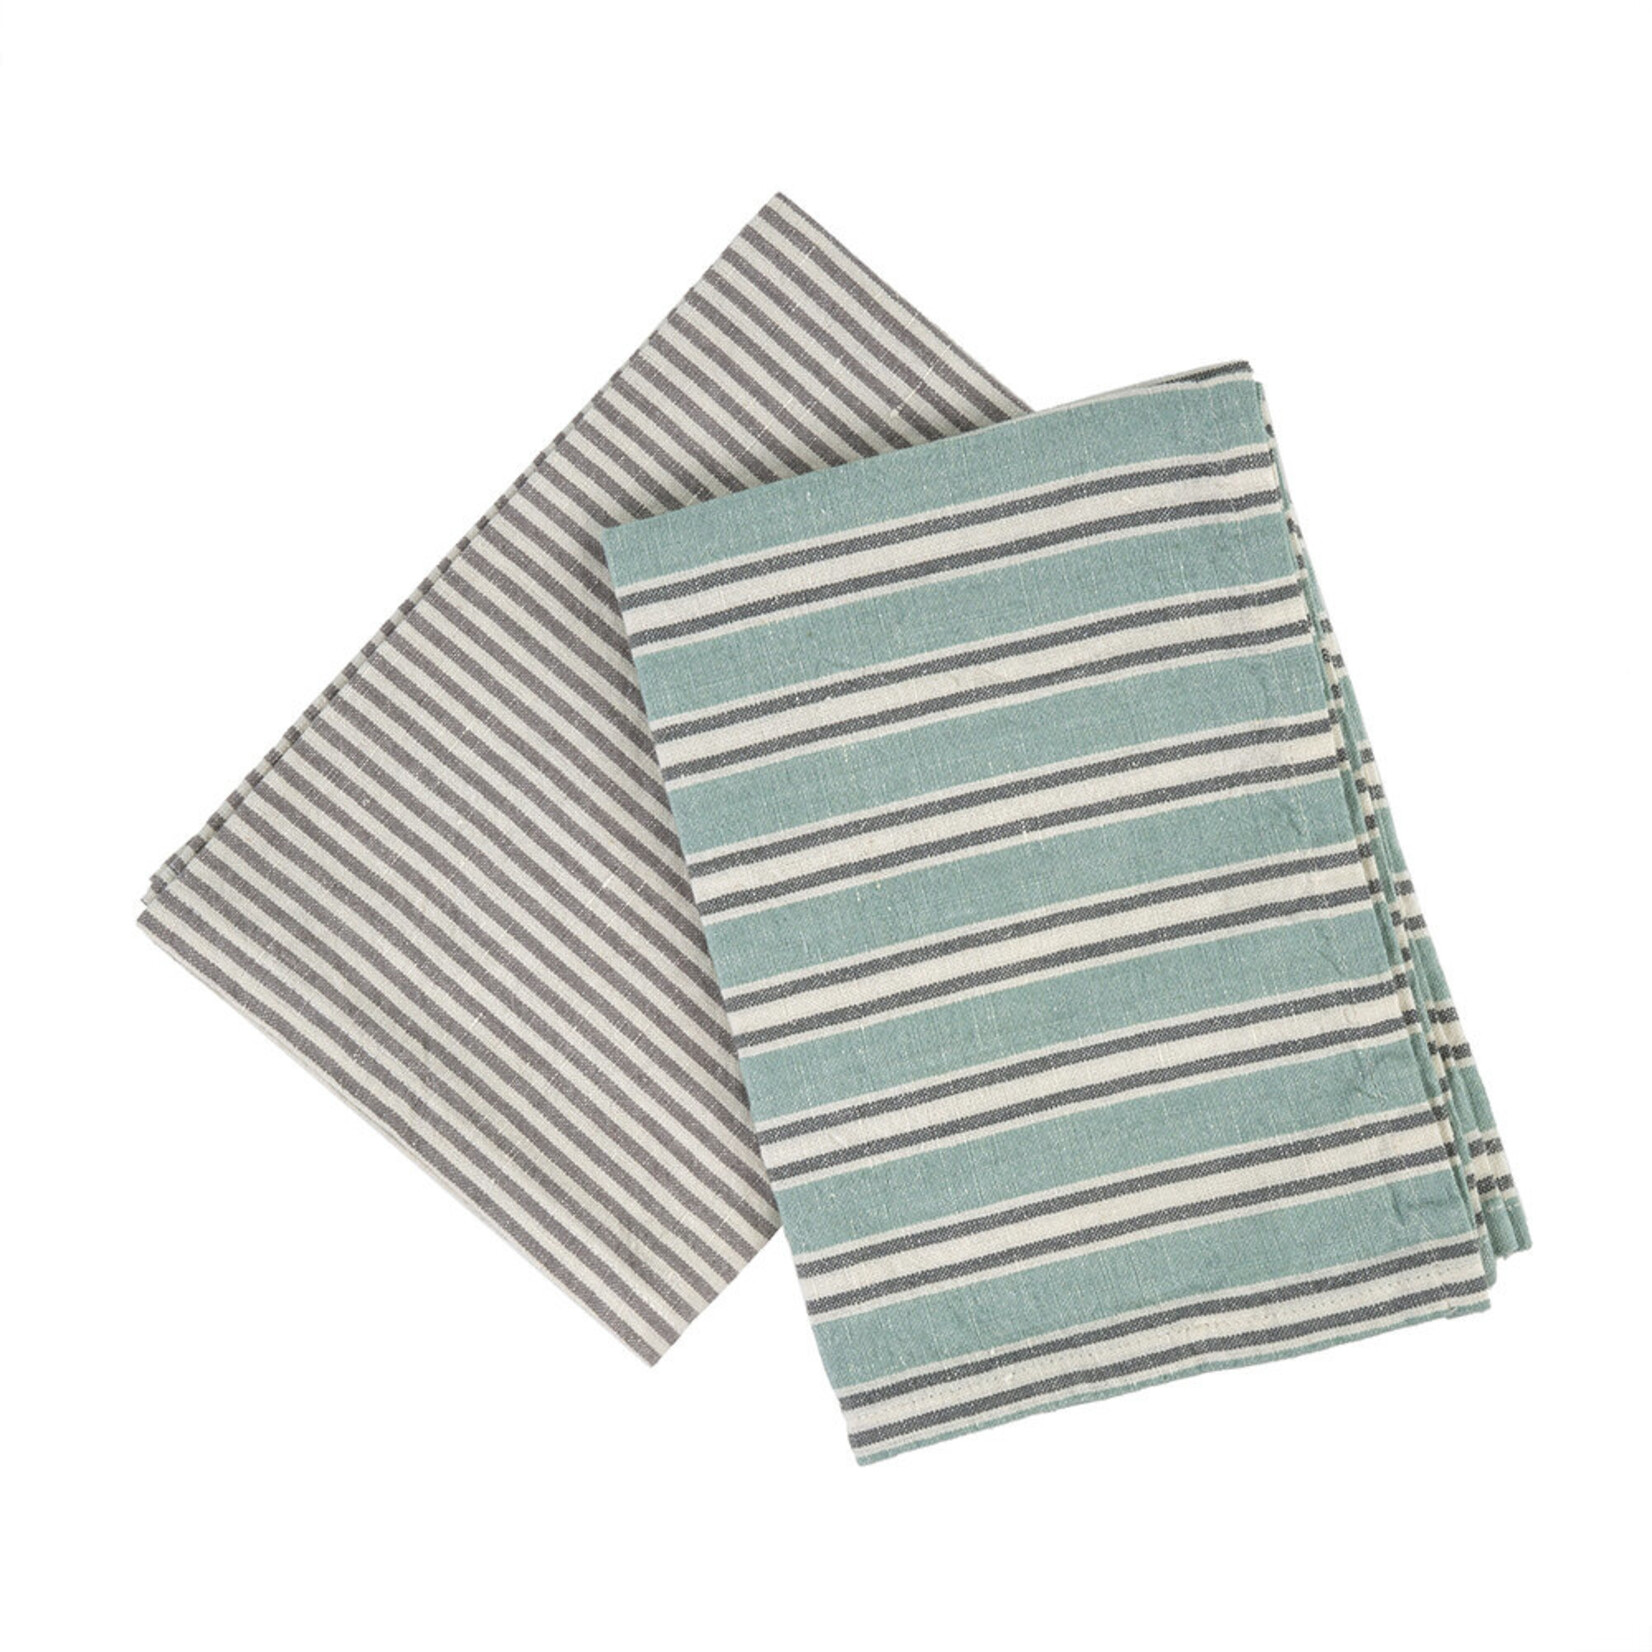 Indaba French Linen Tea Towels Turquoise